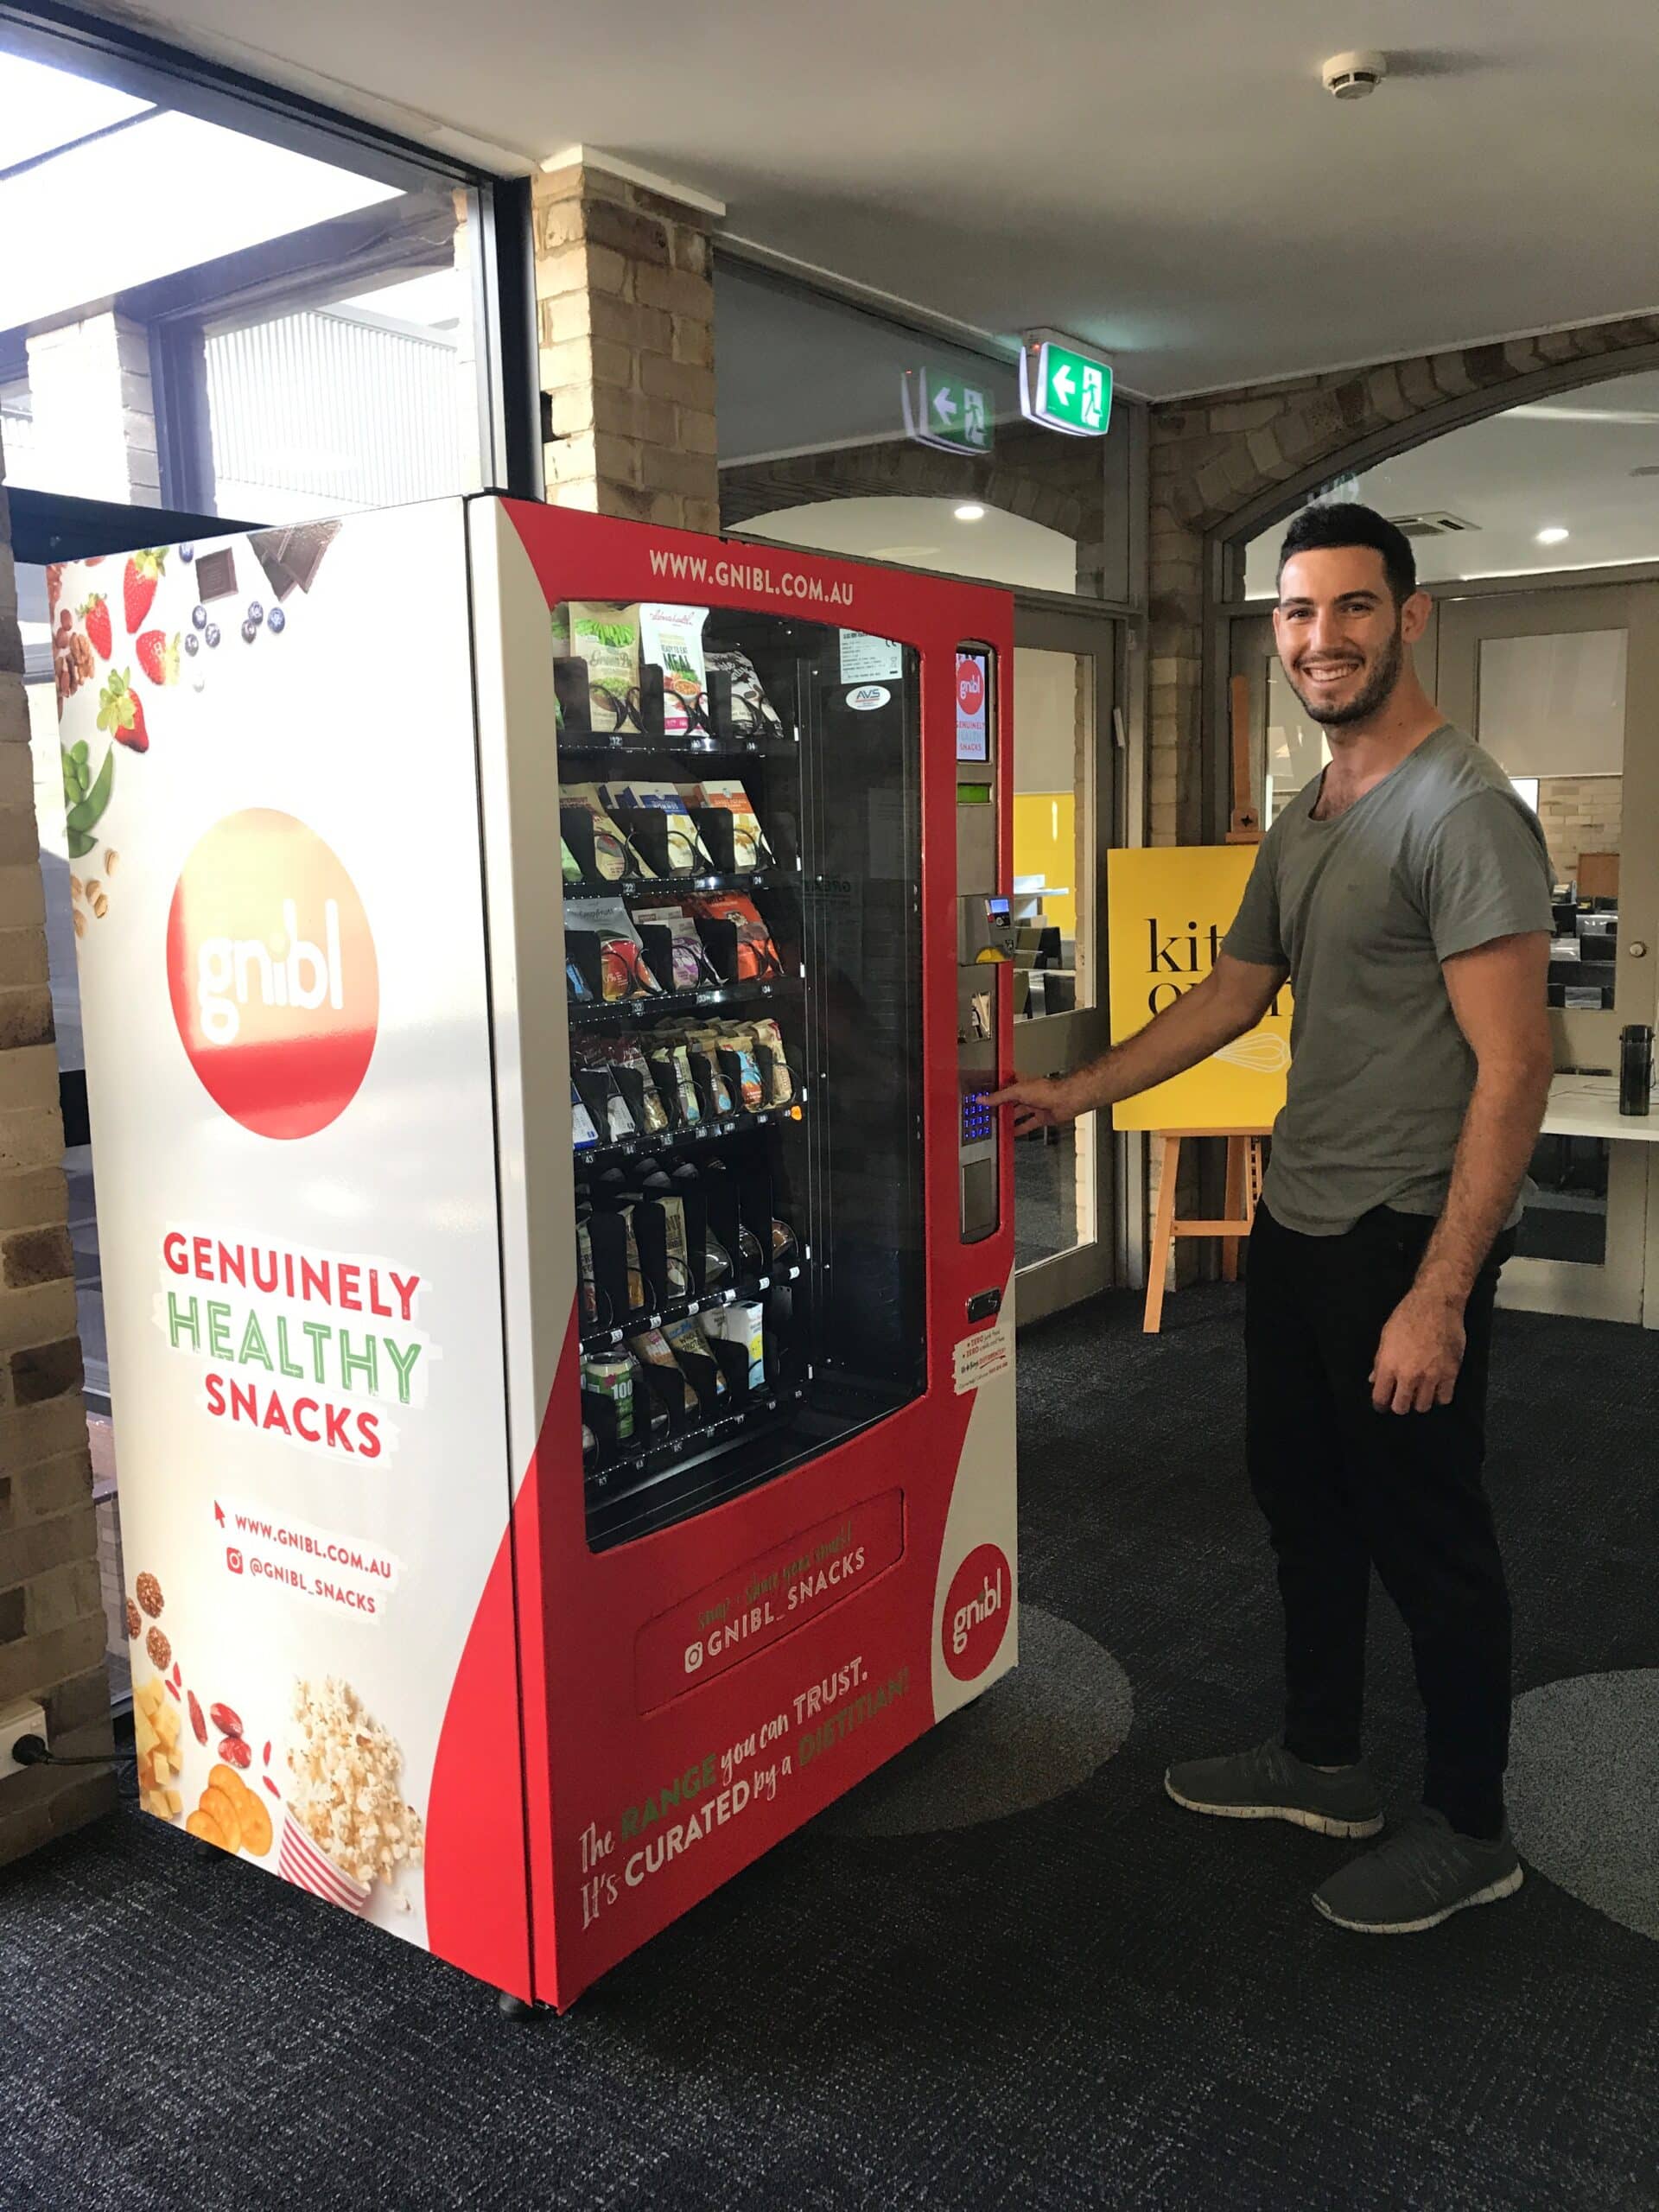 A smiling patron interacting with a Gnibl vending machine at a workplace.